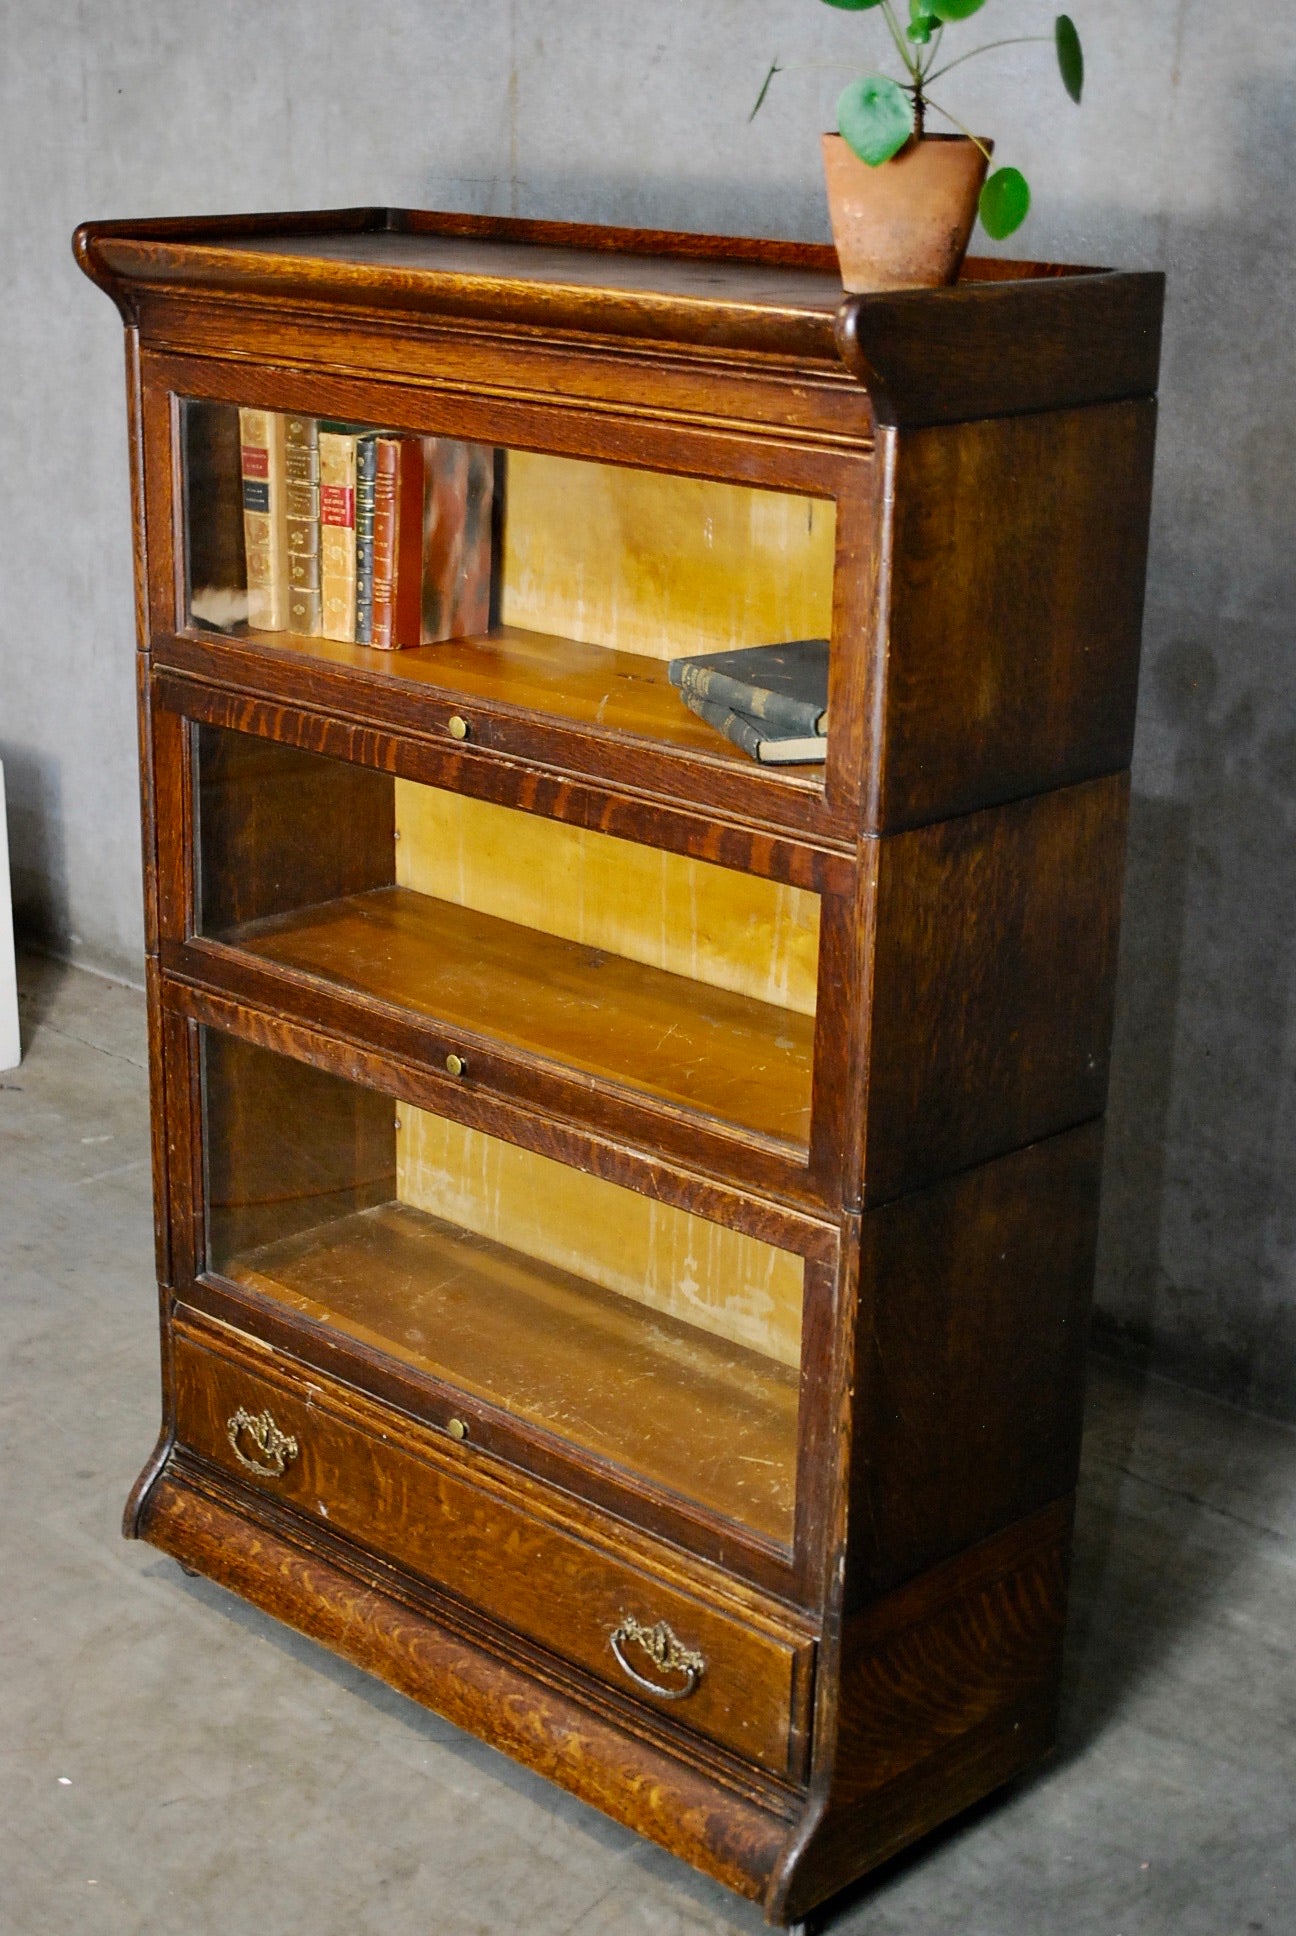 1920-30 Oak Barristers Bookcase By Grand Rapid Furniture Co. | Scott Landon Antiques and Interiors.